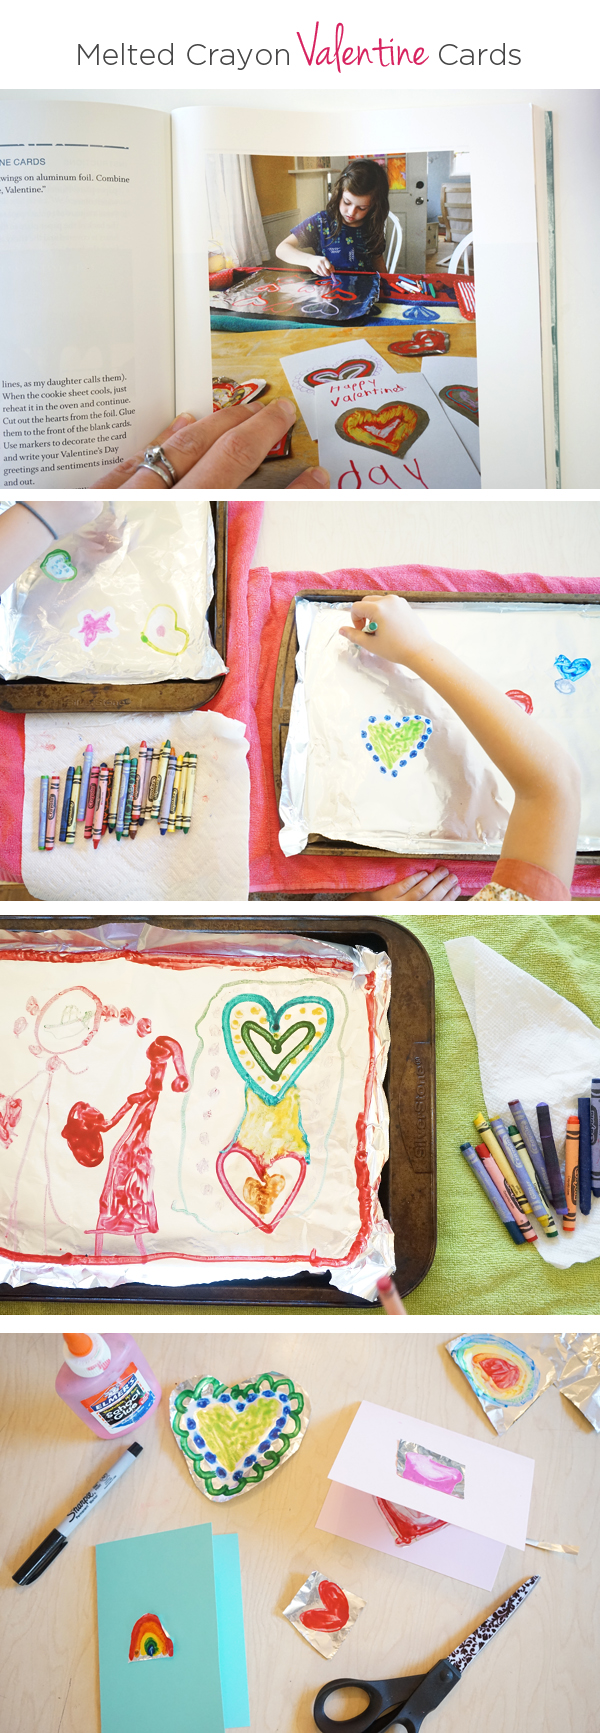 How to make Melted Crayon Valentine Cards | From The Artful Year Book by Jean Van't Hul